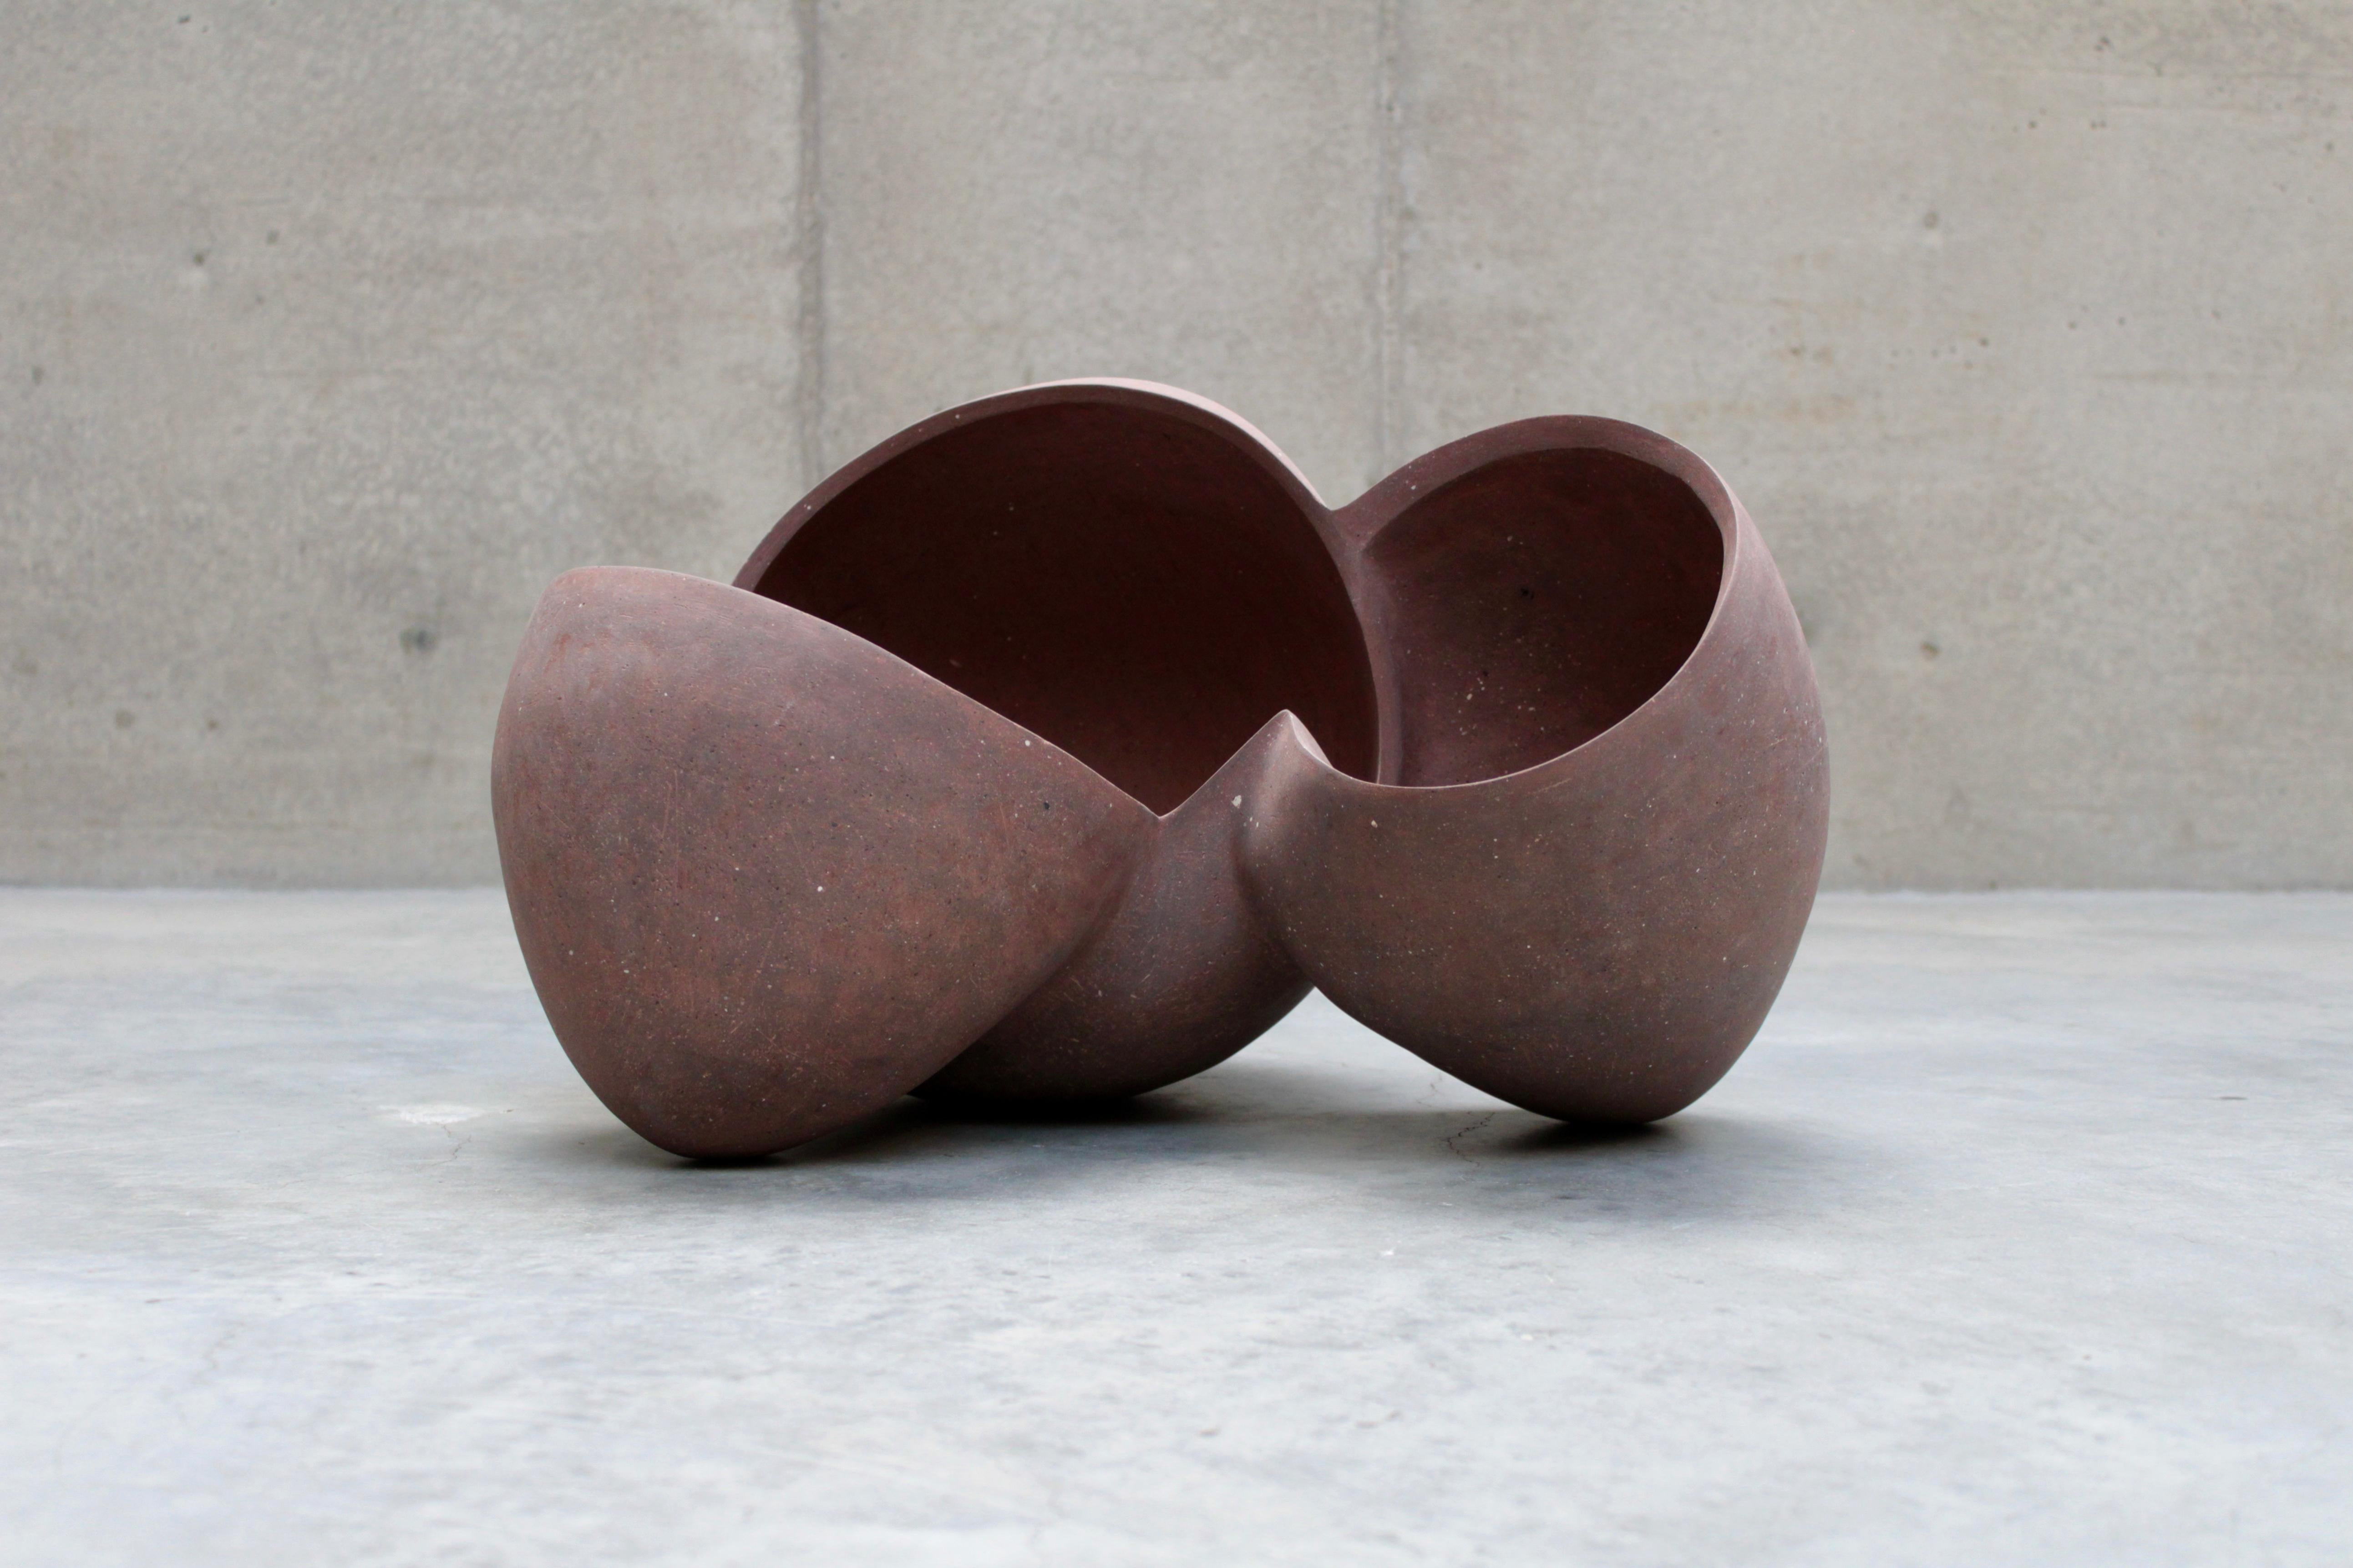 Title: Magnolia 04 
Year: 2021
Artist: Zoë Powell

Large, free-form ceramic sculpture made from a blend of high-iron stoneware clays hand-collected by the artist in Minnesota. The surface is hand-polished with diamond sandpaper to render a matte